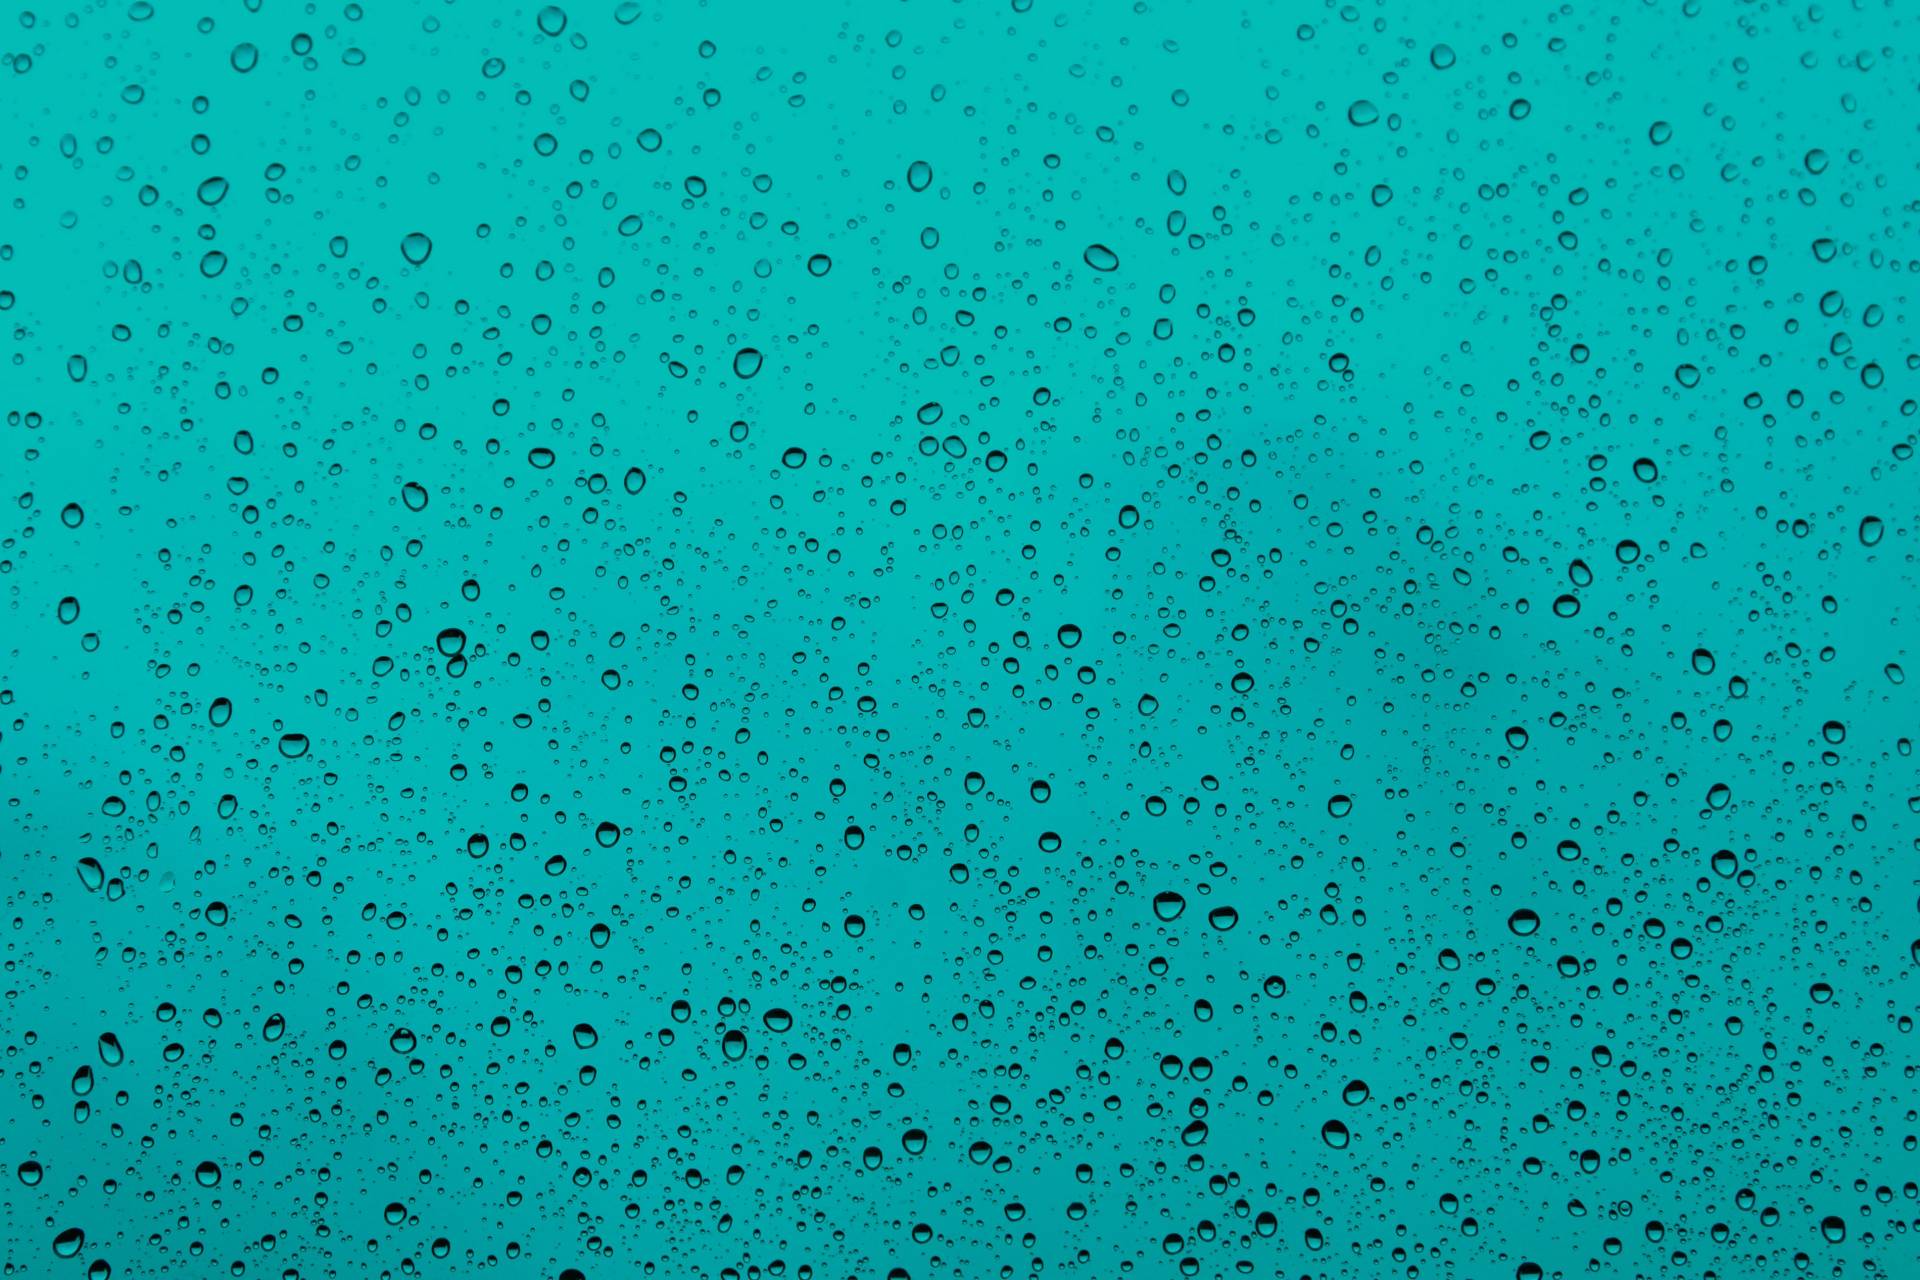 waterdrops on a blue background